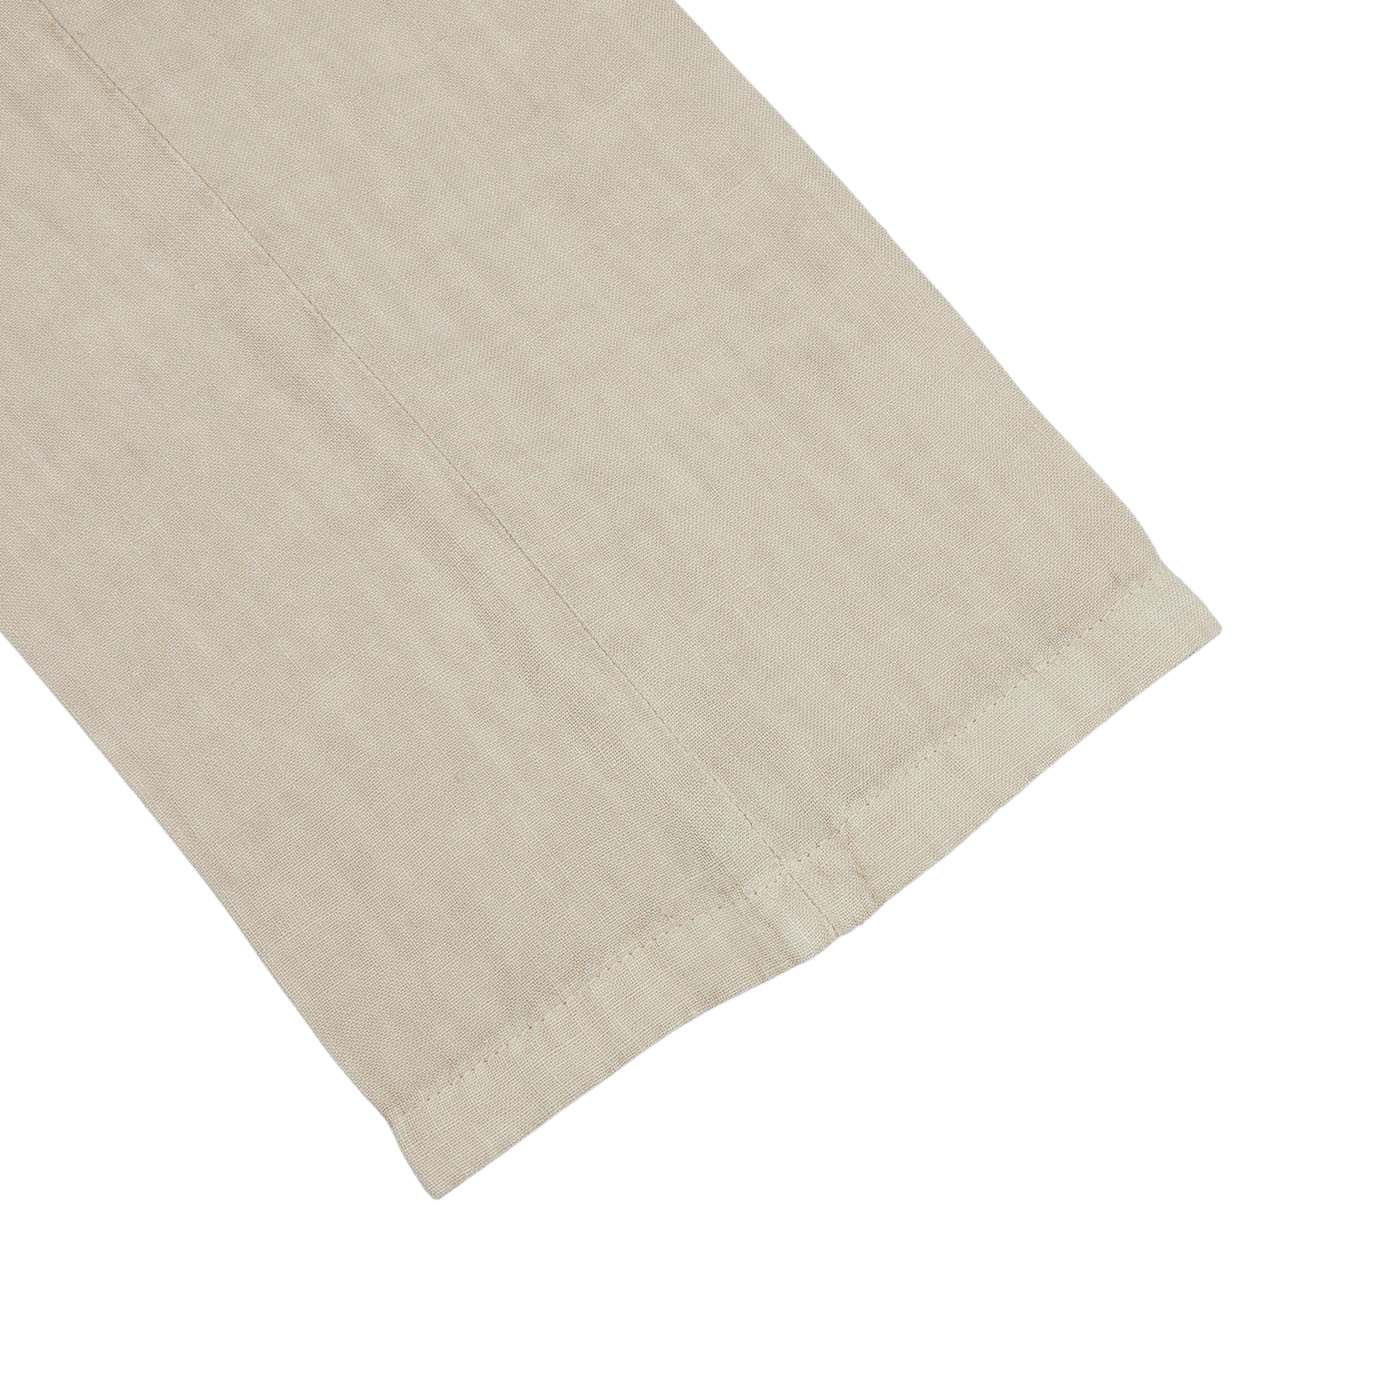 A Sand Beige Washed Linen Unstructured Suit on a white surface, made of beige Boglioli linen fabric.